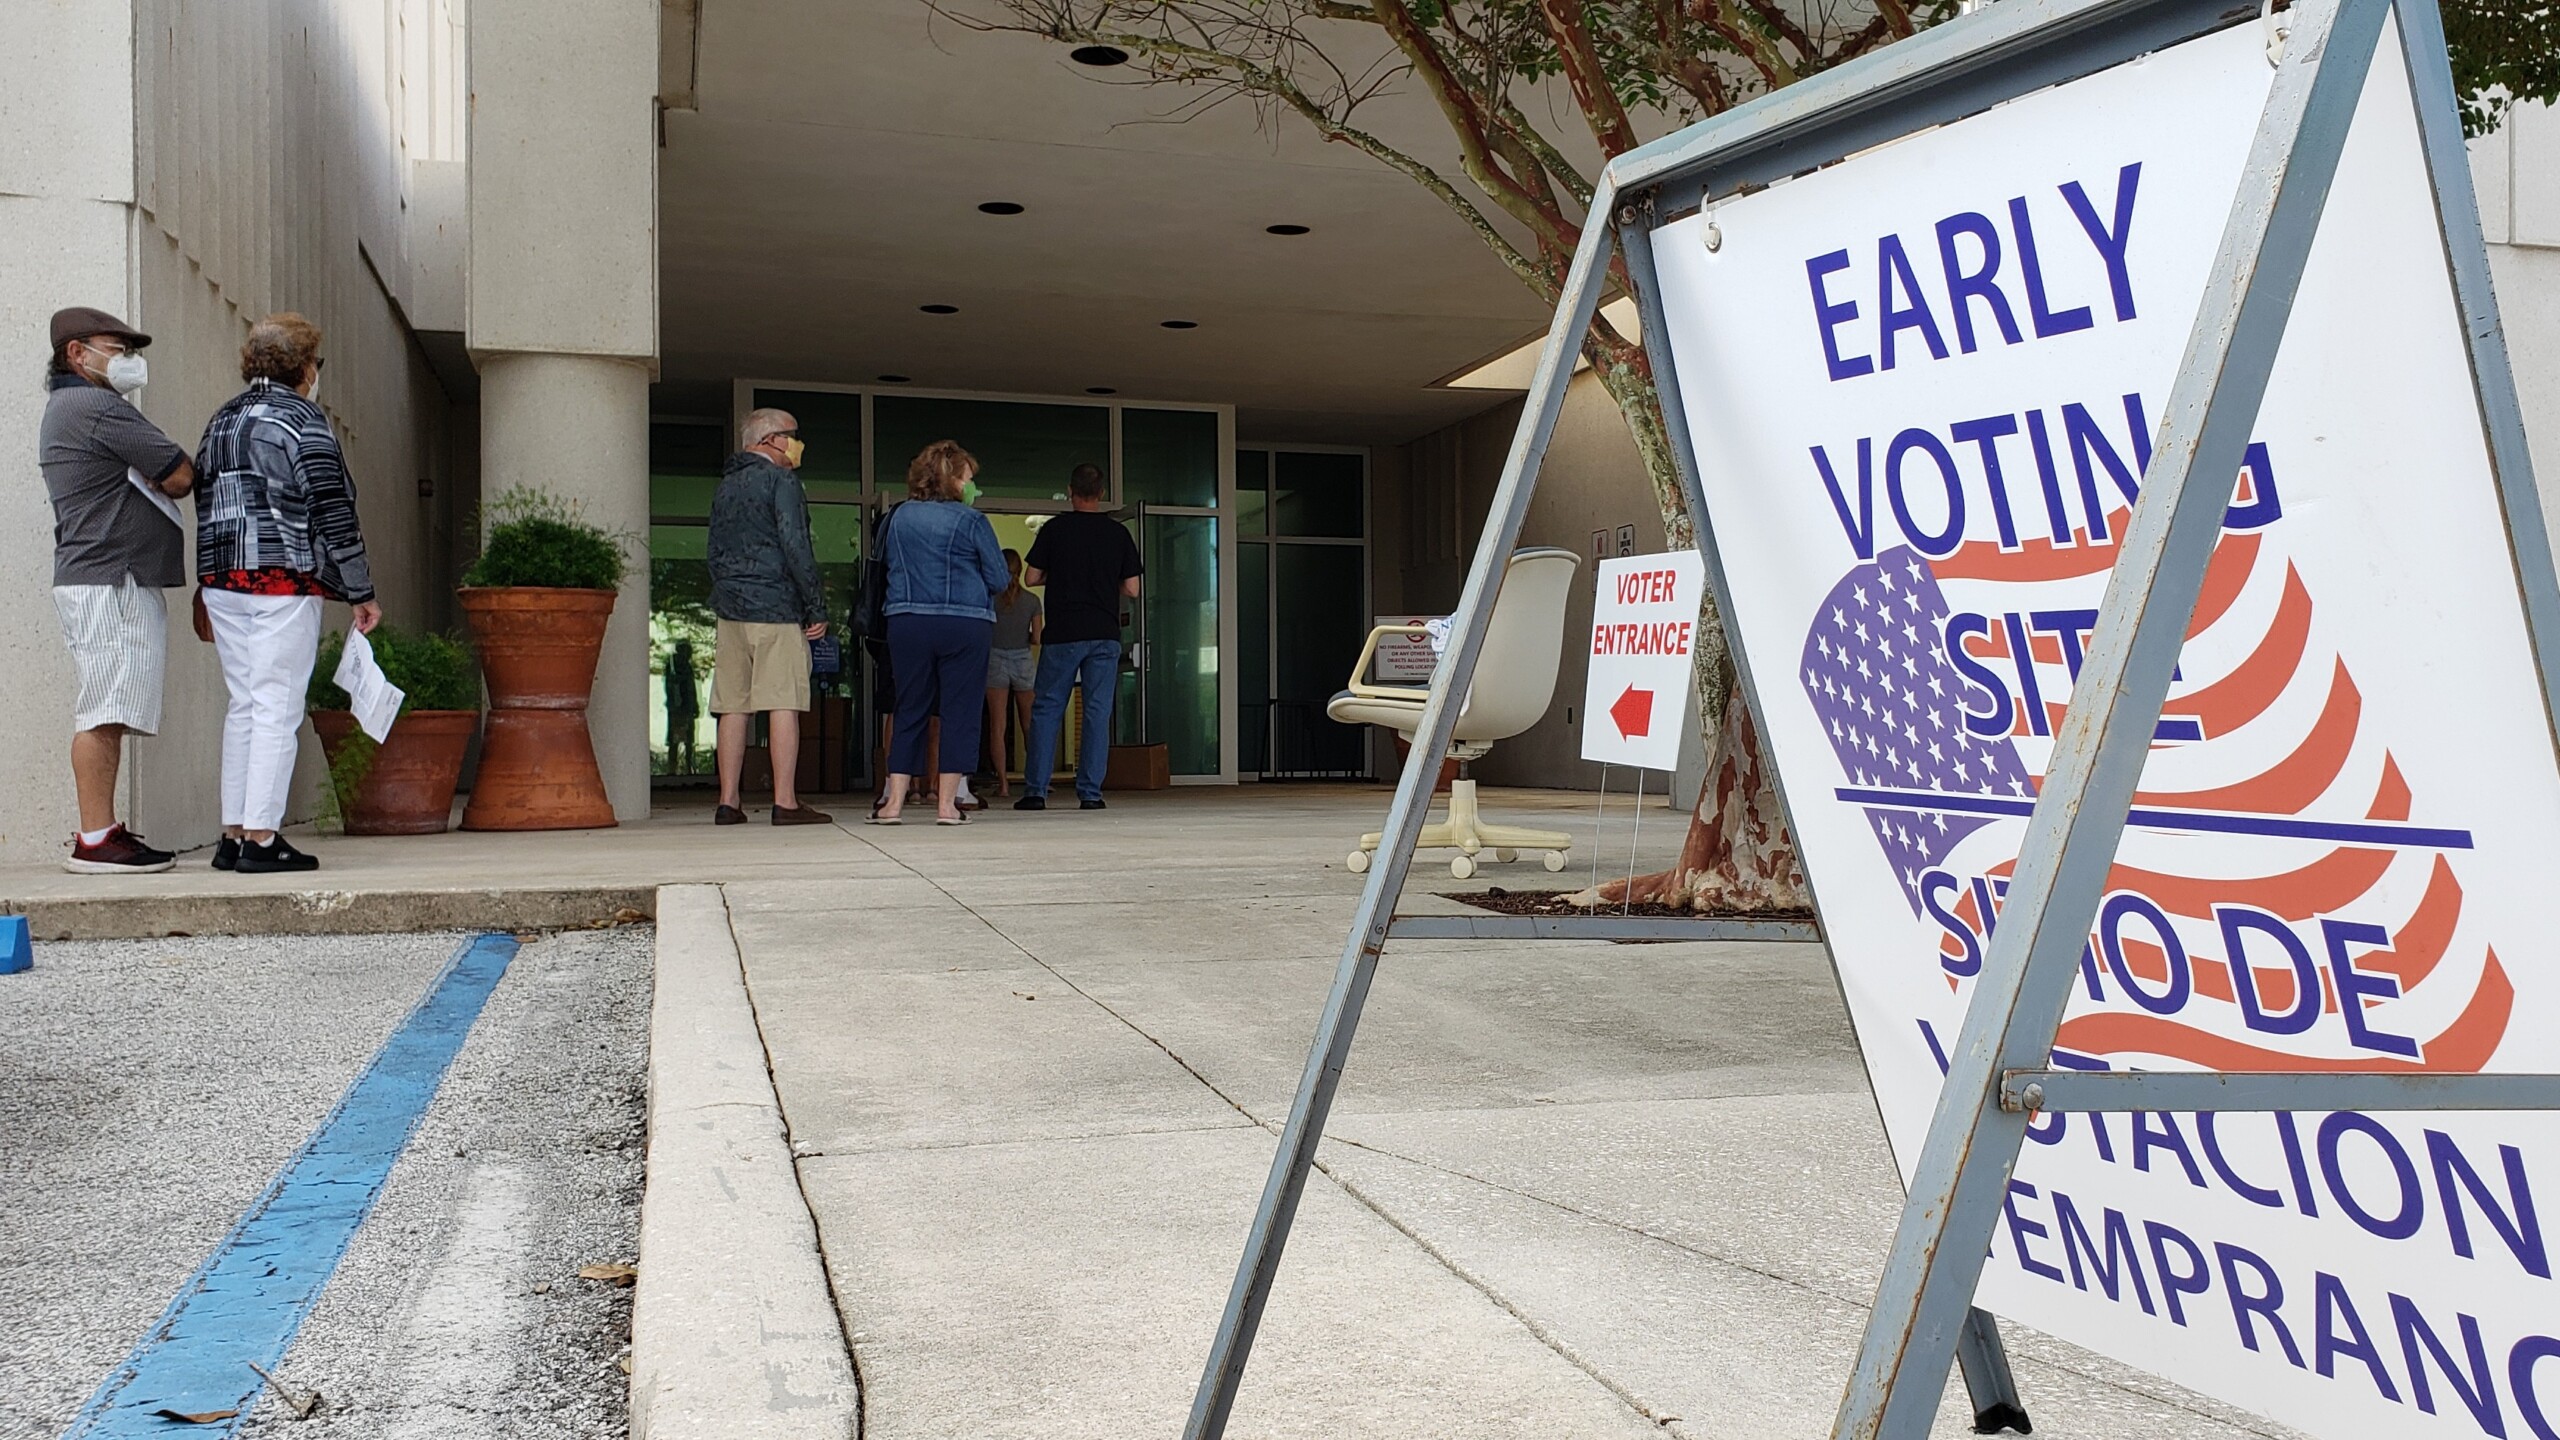 Featured image for “Early voting under way in Duval County”